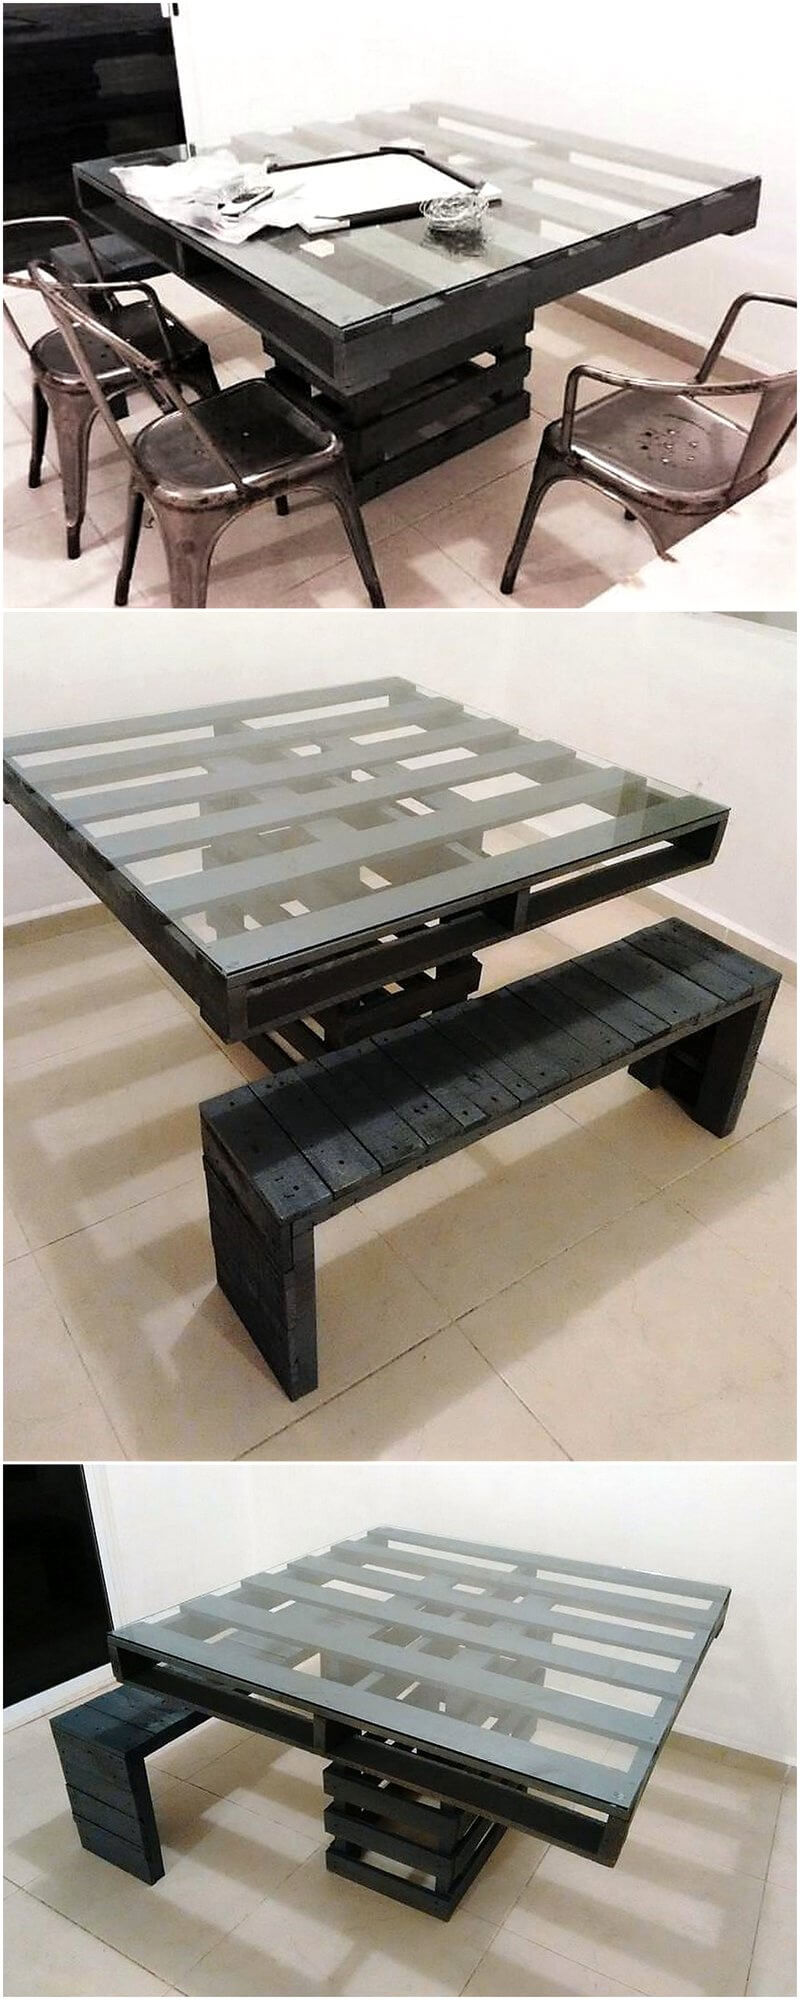 pallets wooden recycled table idea